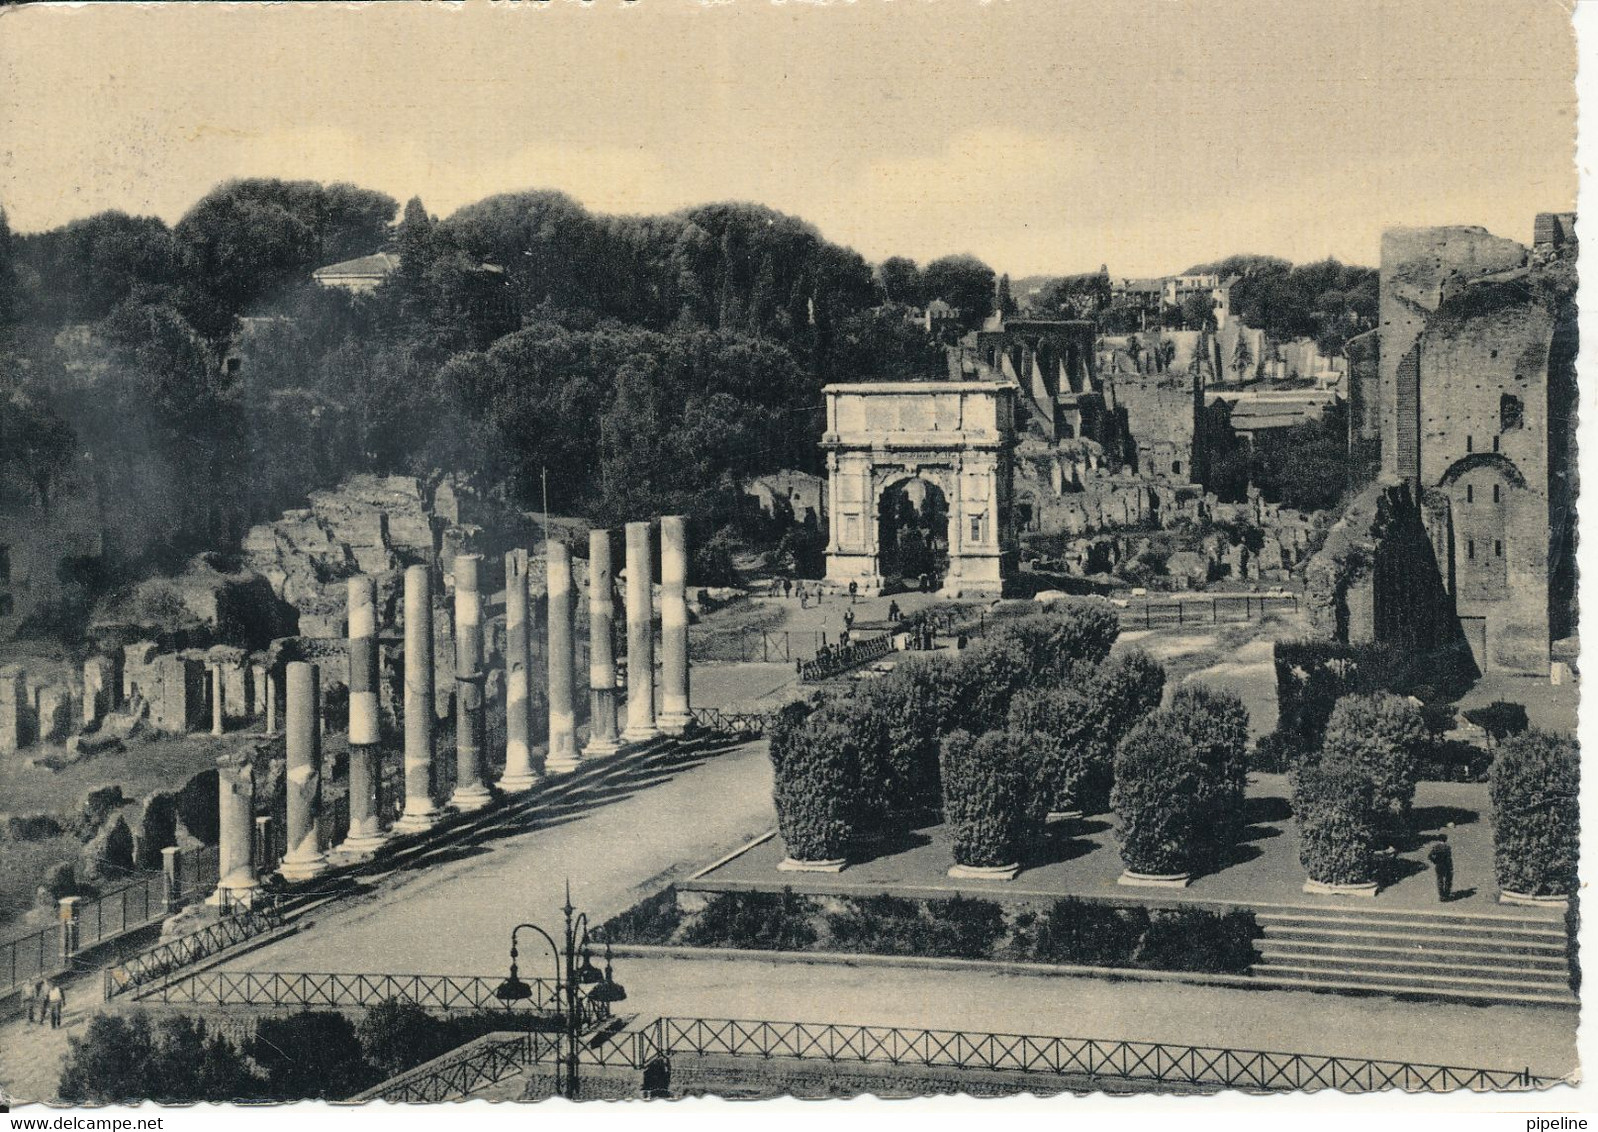 Italy Postcard Sent To Germany 16-2-1950 Arch Of Titus - Parcs & Jardins